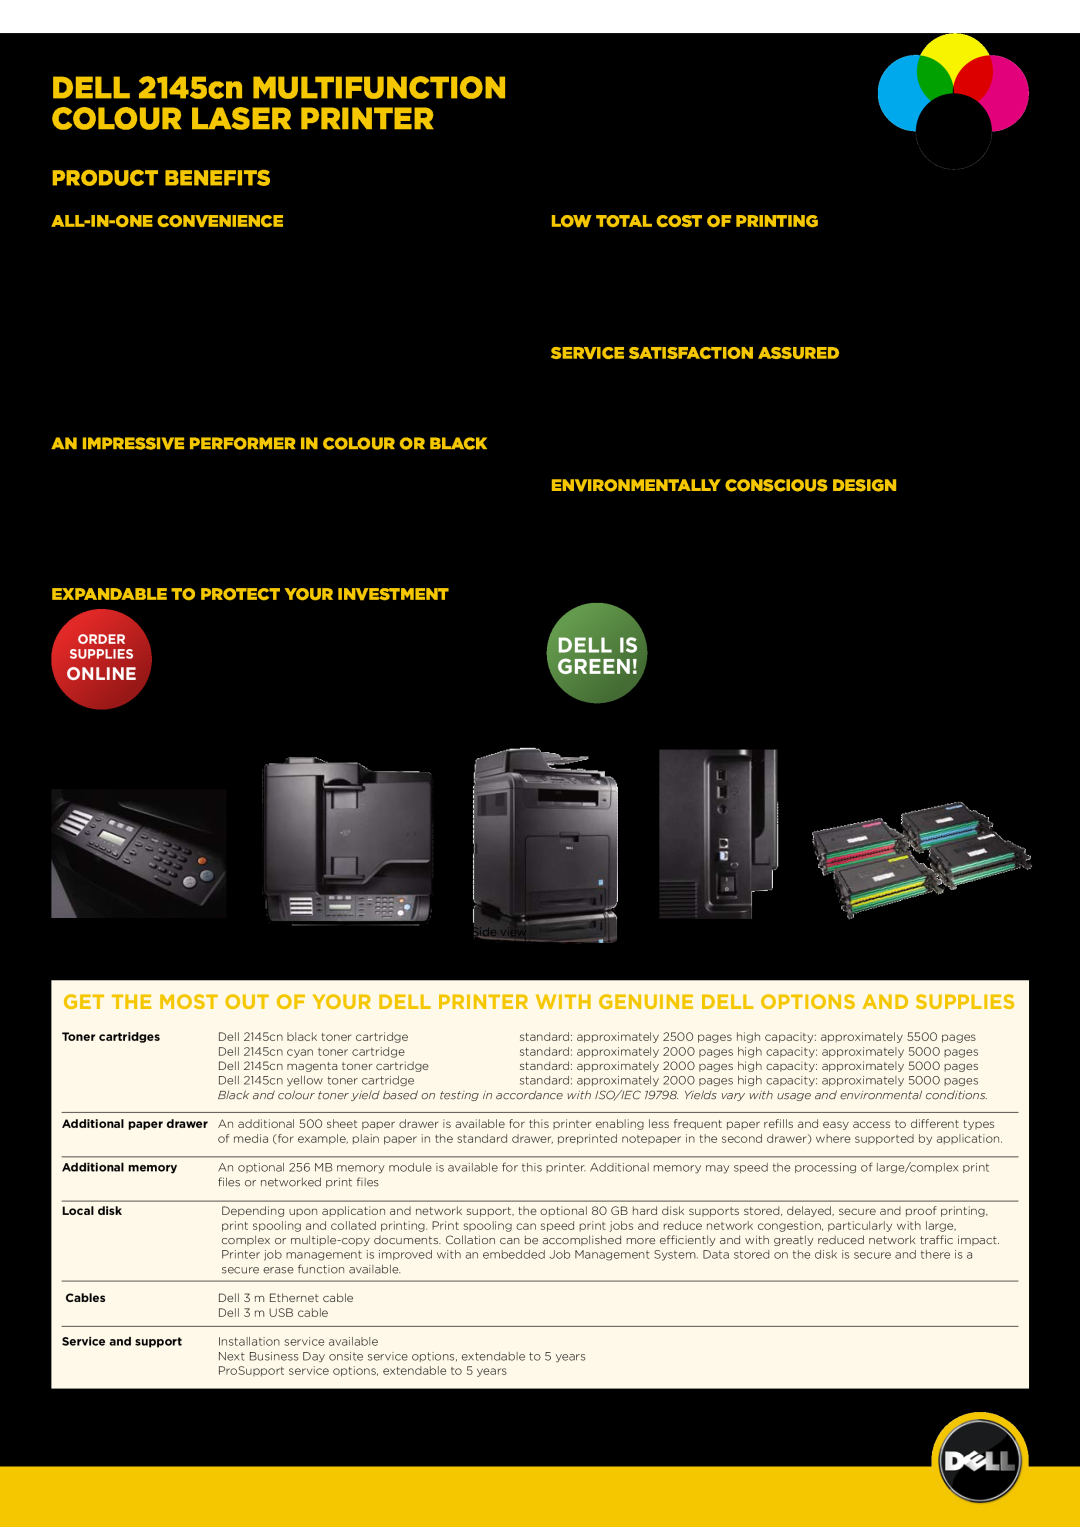 Dell manual DELL 2145cn MULTIFUNCTION COLOUR LASER PRINTER, Product Benefits, online, All-in-One Convenience 